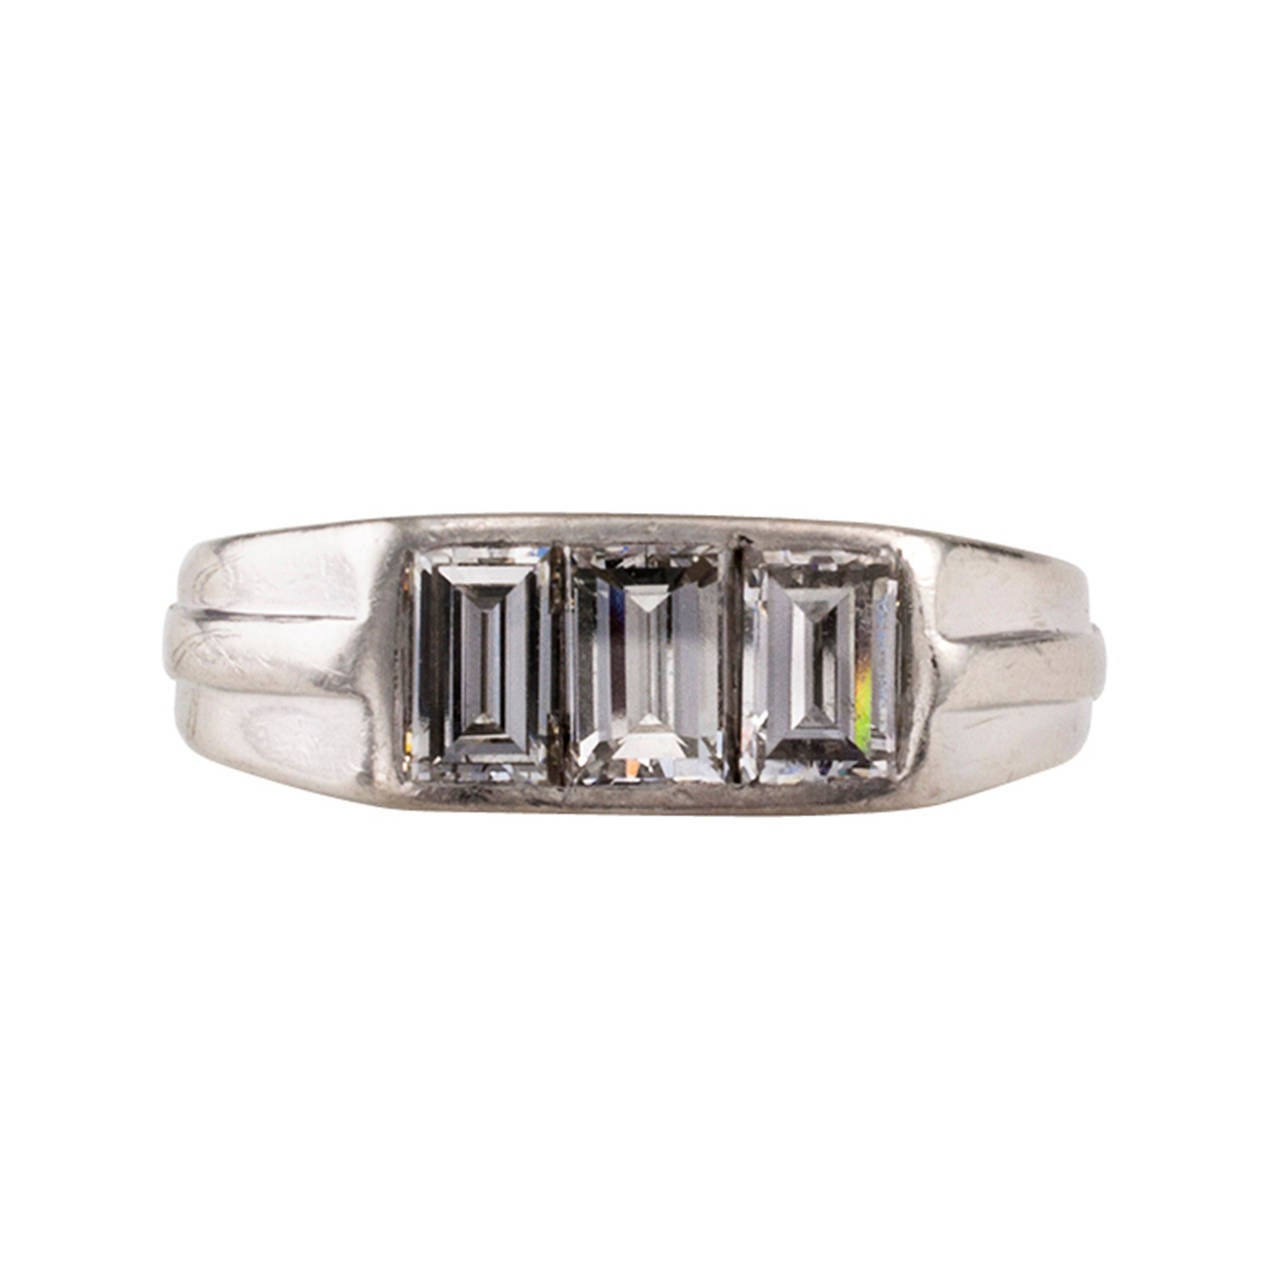 Art Deco Baguette Diamond And Platinum Ring Band

Ingeniously designed with a simple play on geometric lines to showcase the three fine and large rectangular baguette diamonds totaling  approximately 1.50 carats, approximately F - G color and VS